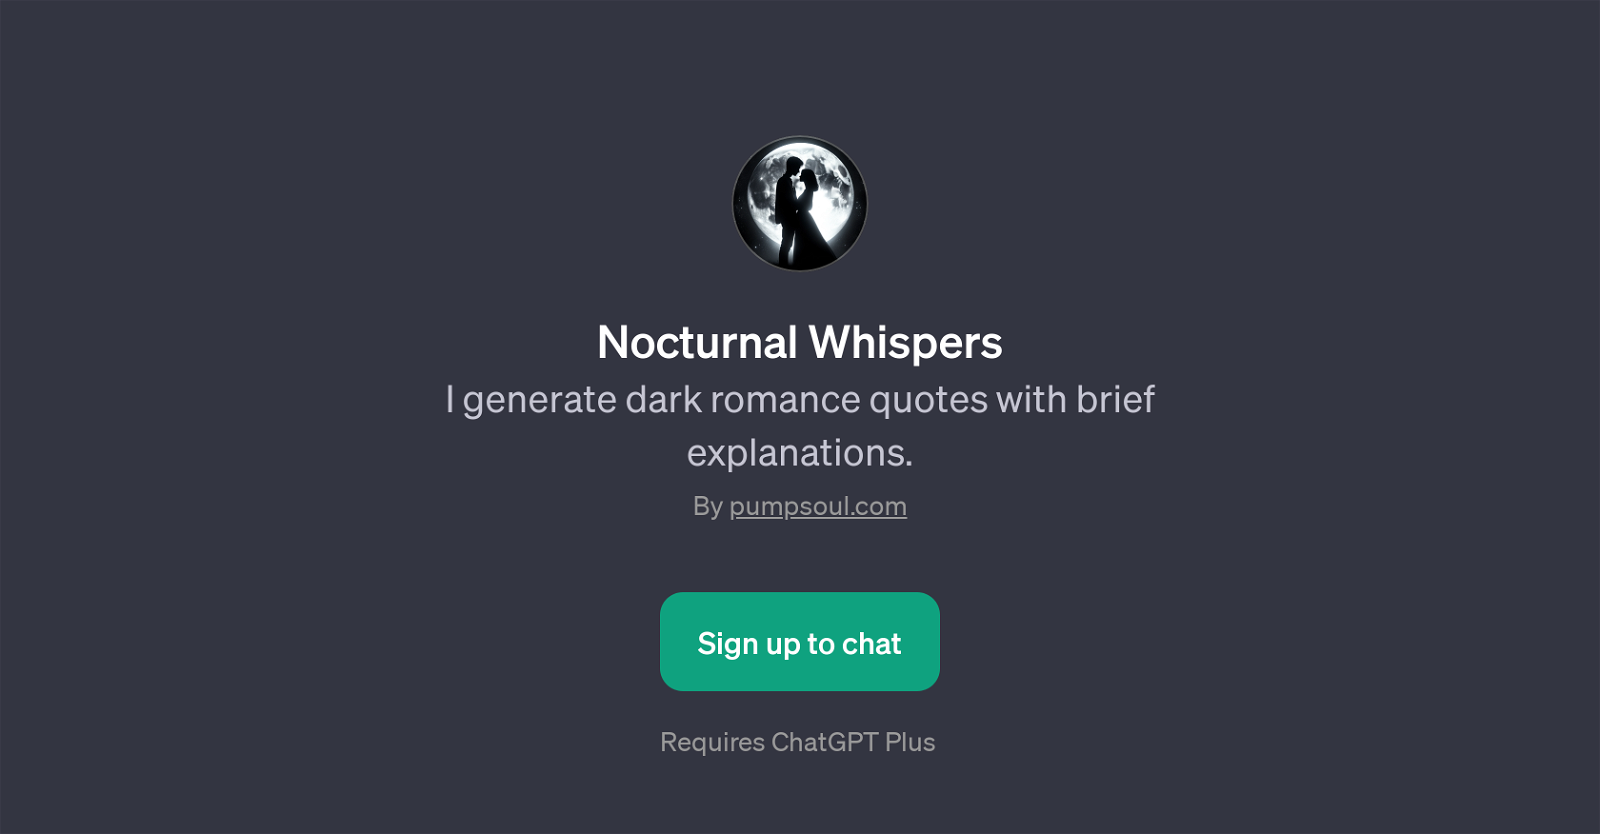 Nocturnal Whispers website